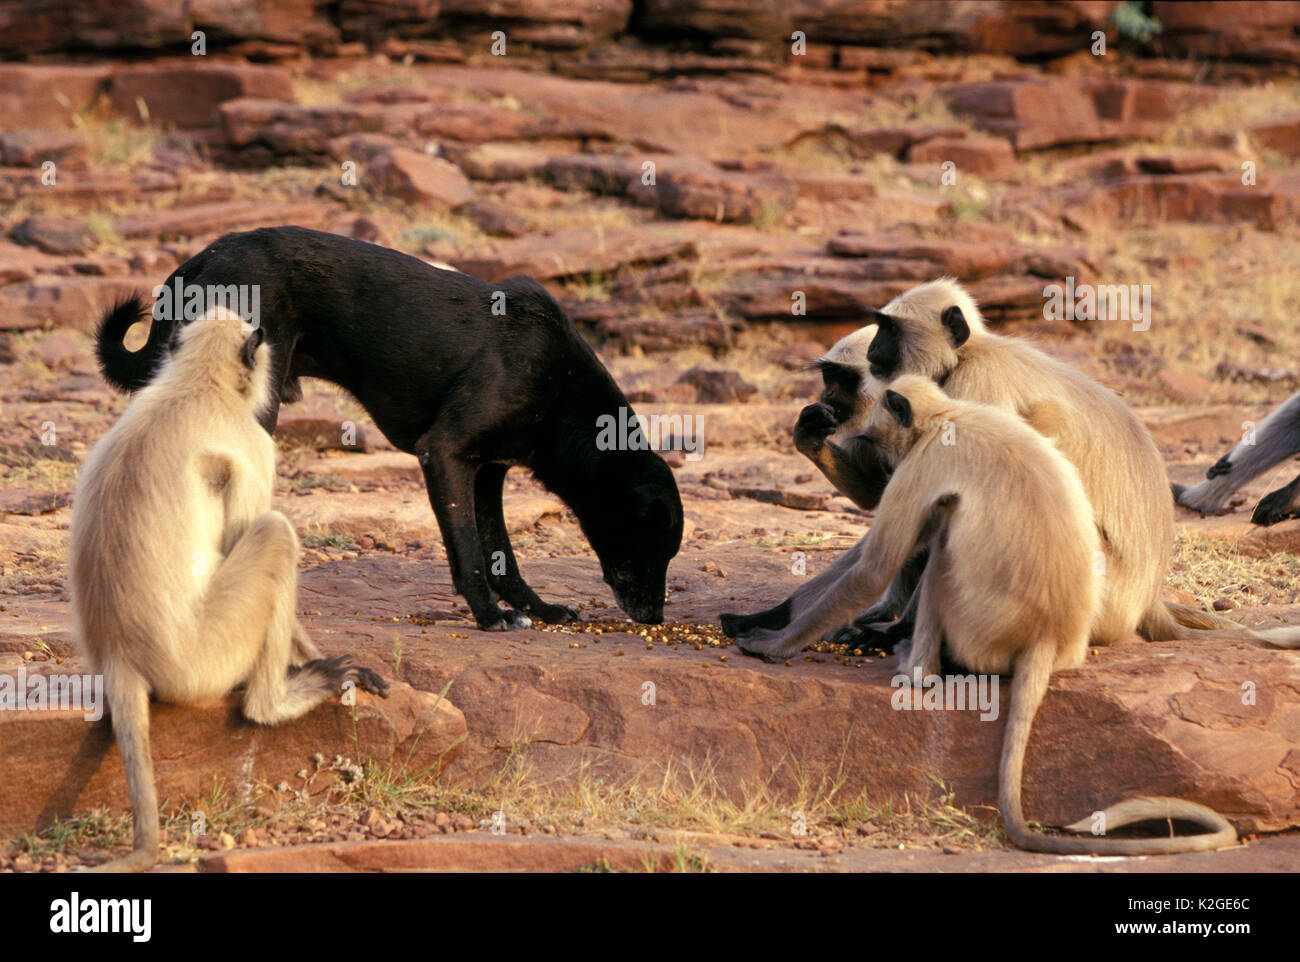 Hanuman langurs (Semnopithecus entellus) and a dog feeding on food left by people, Rajasthan, India. Stock Photo